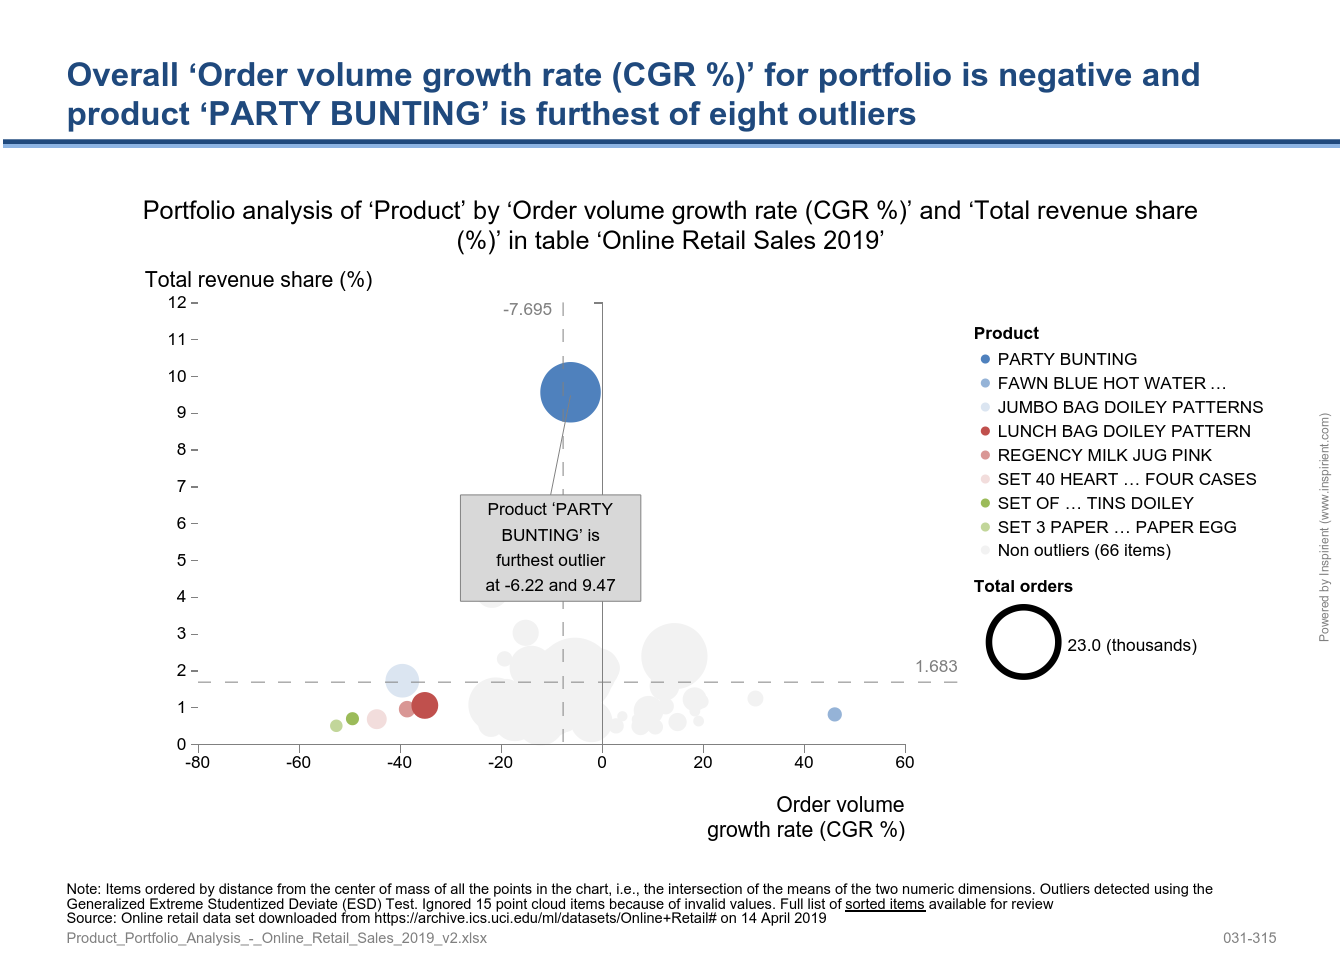 Portfolio analysis of ‘Product’ by ‘Order volume growth rate (CAGR %)’ and ‘Total revenue share (%)’